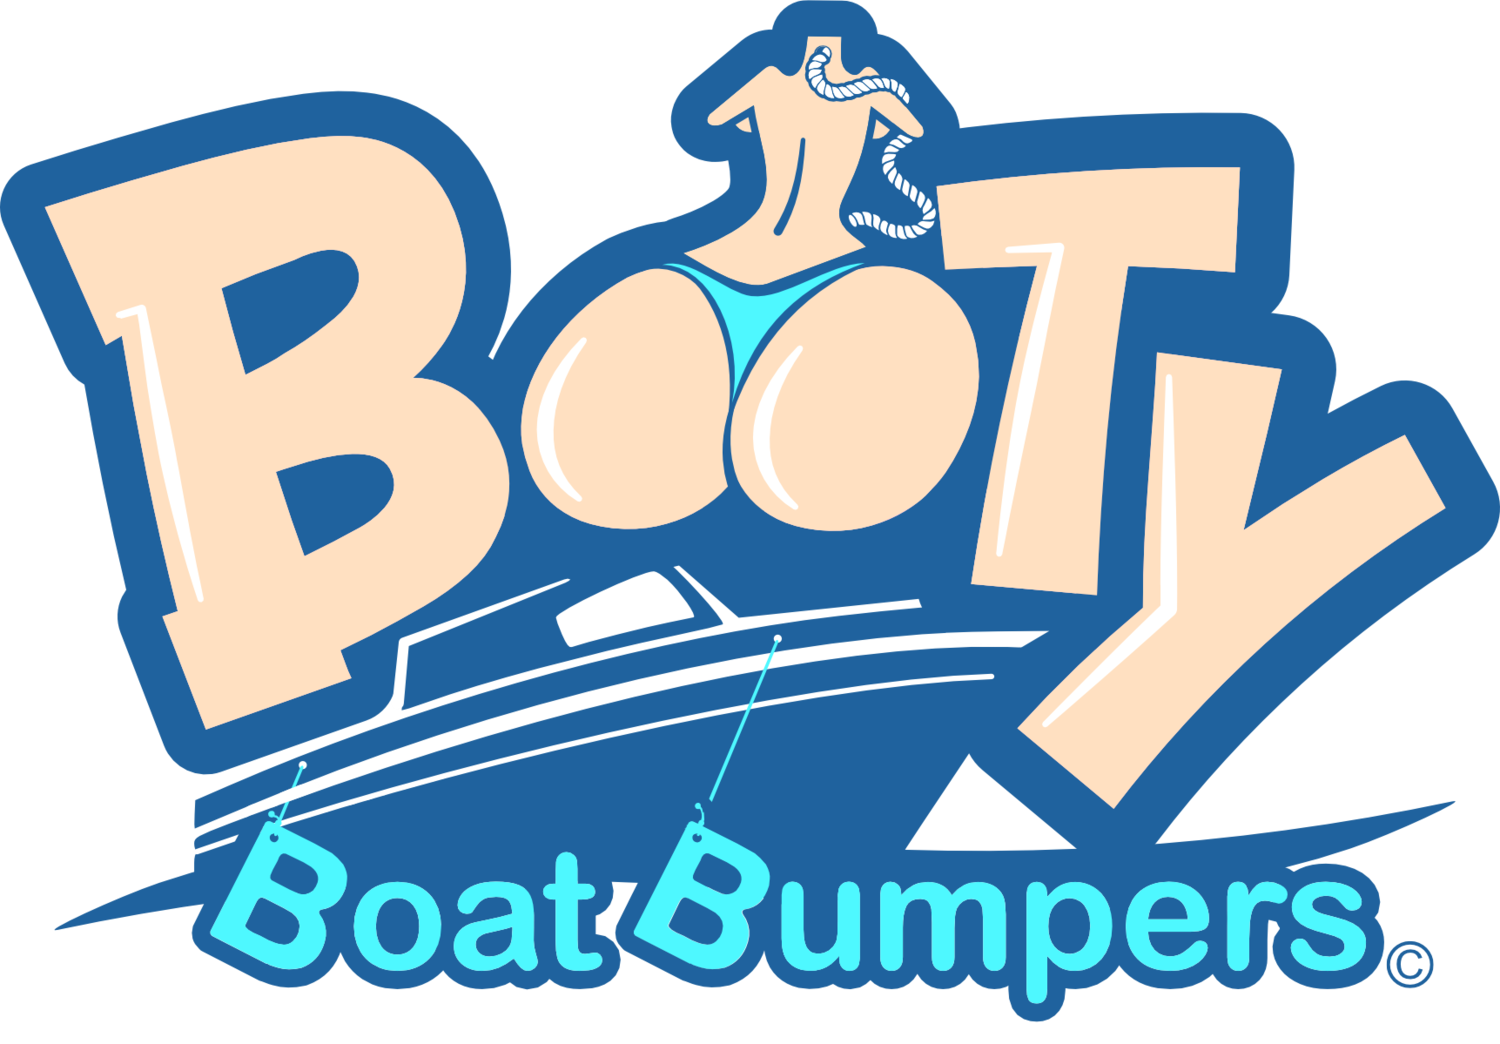 Booty Boat Bumpers